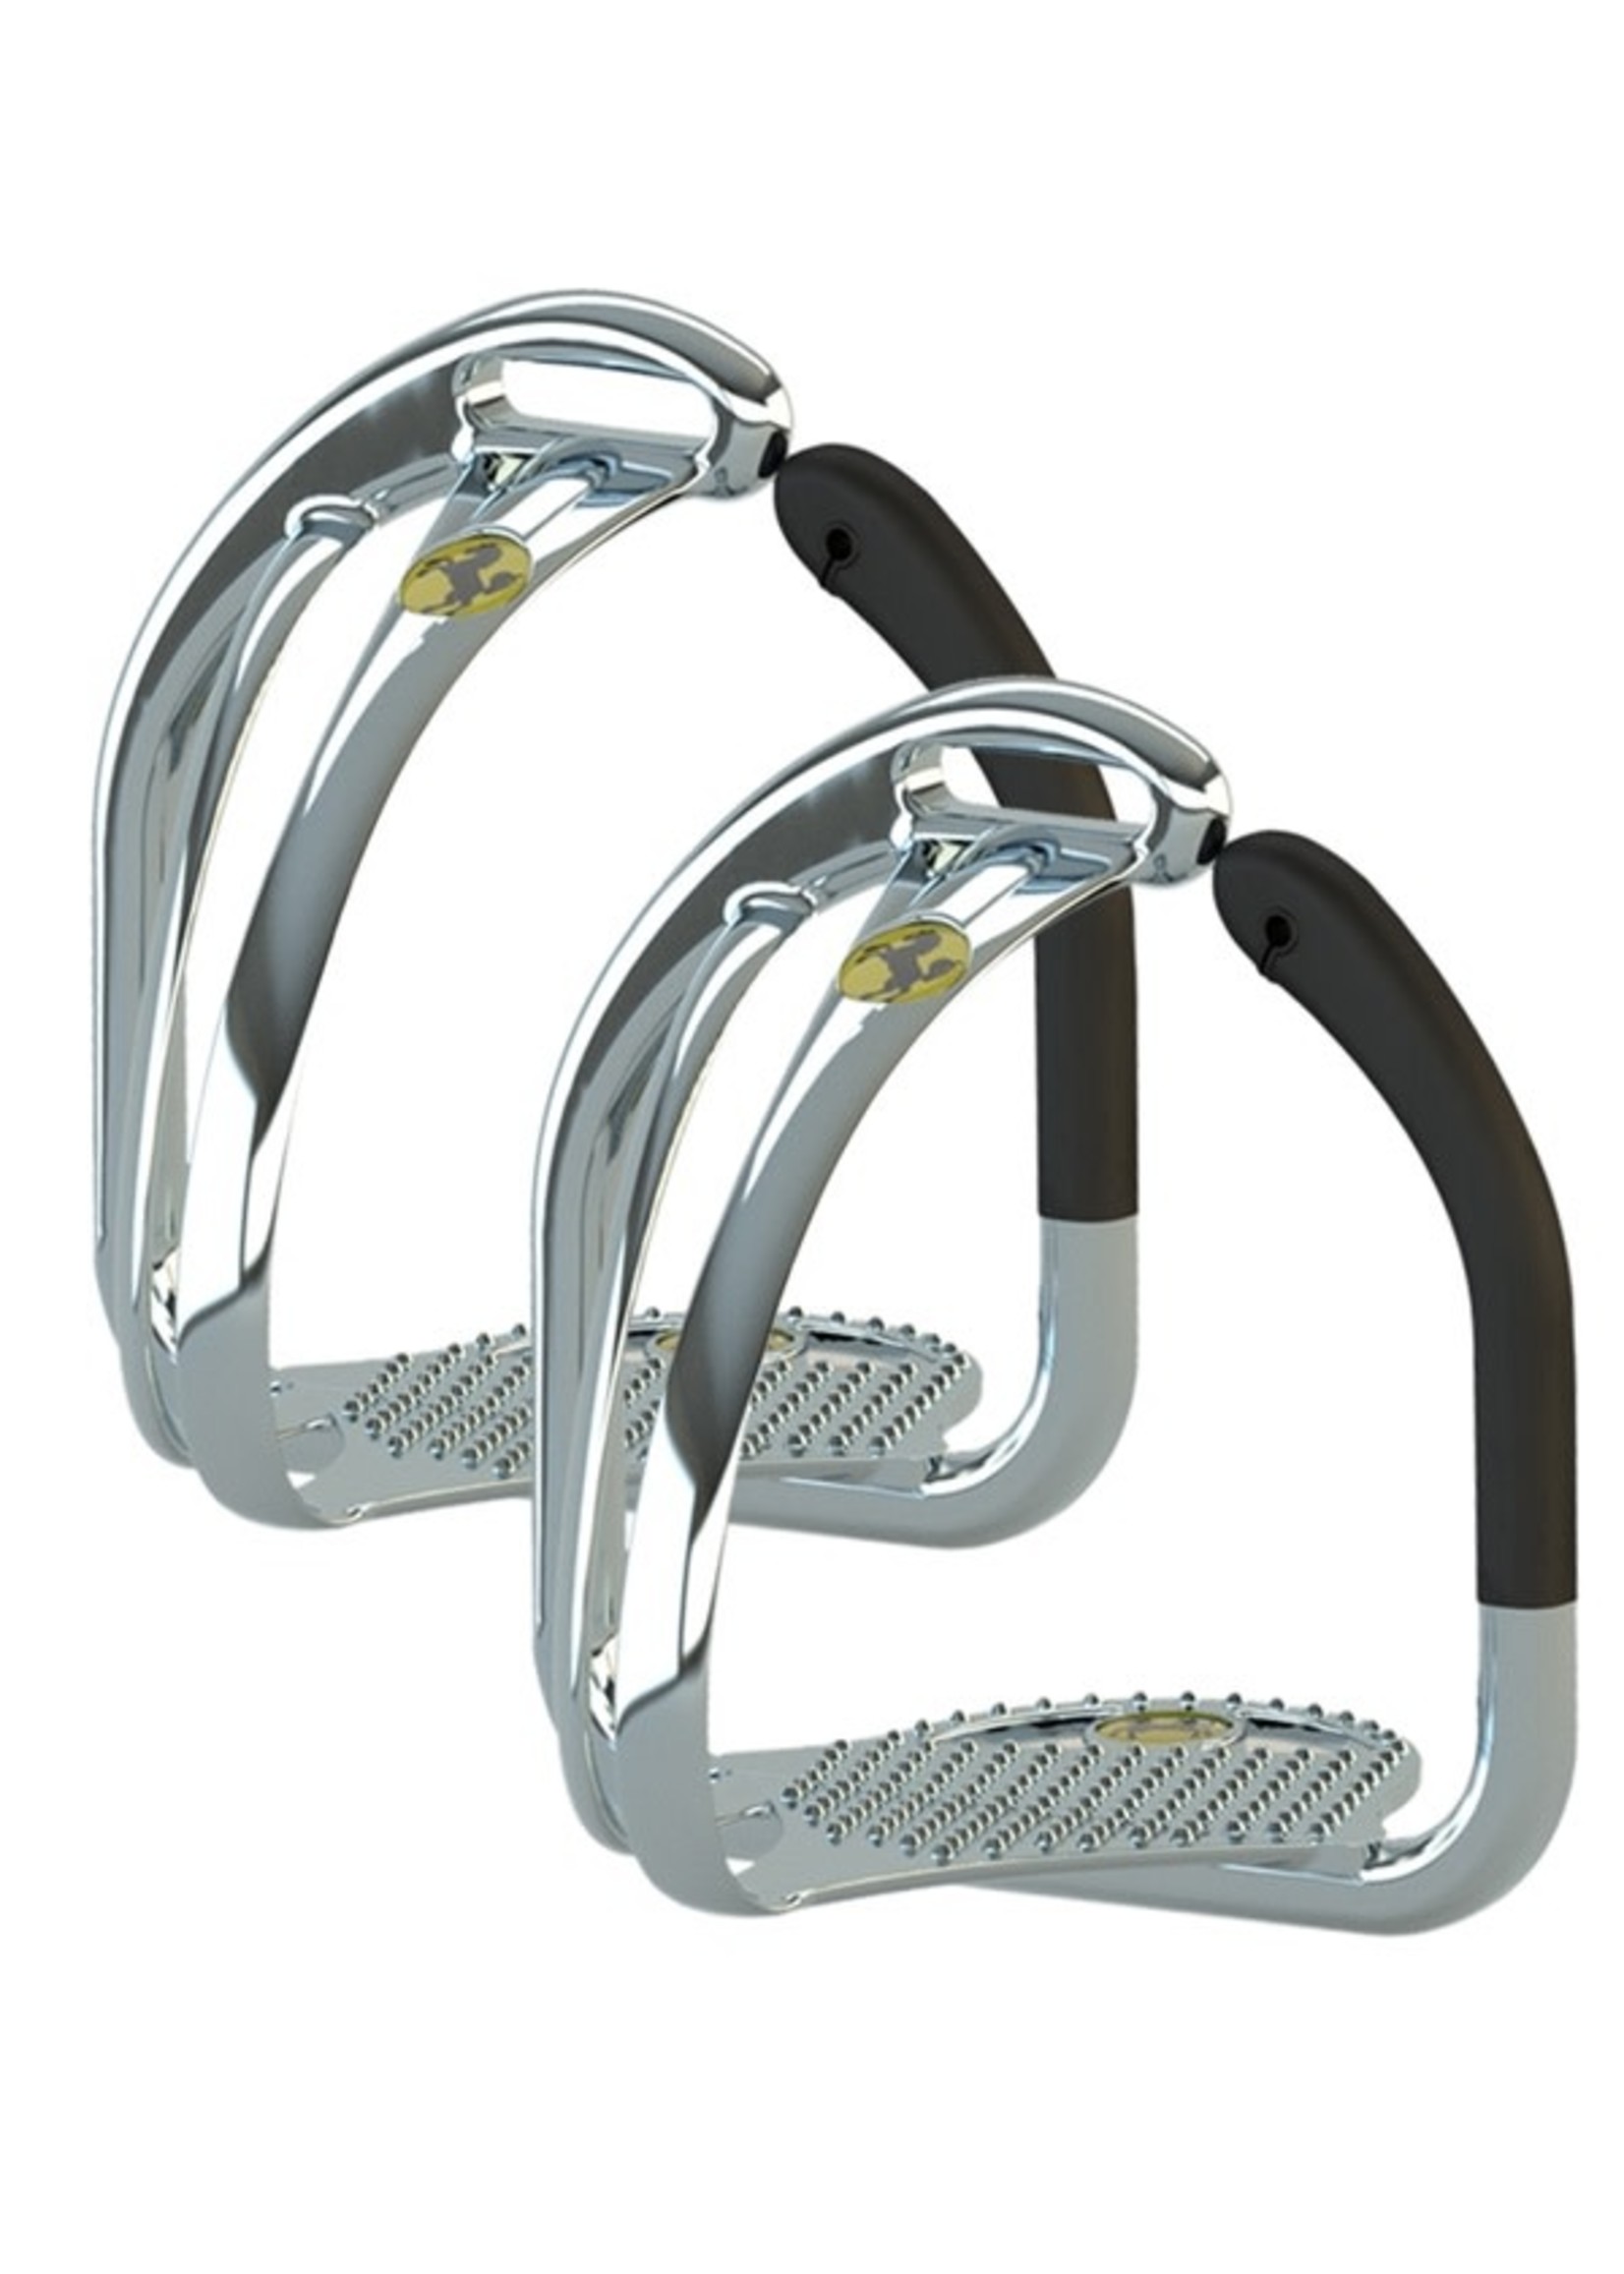 Space Technology Safety STS Stirrup Irons